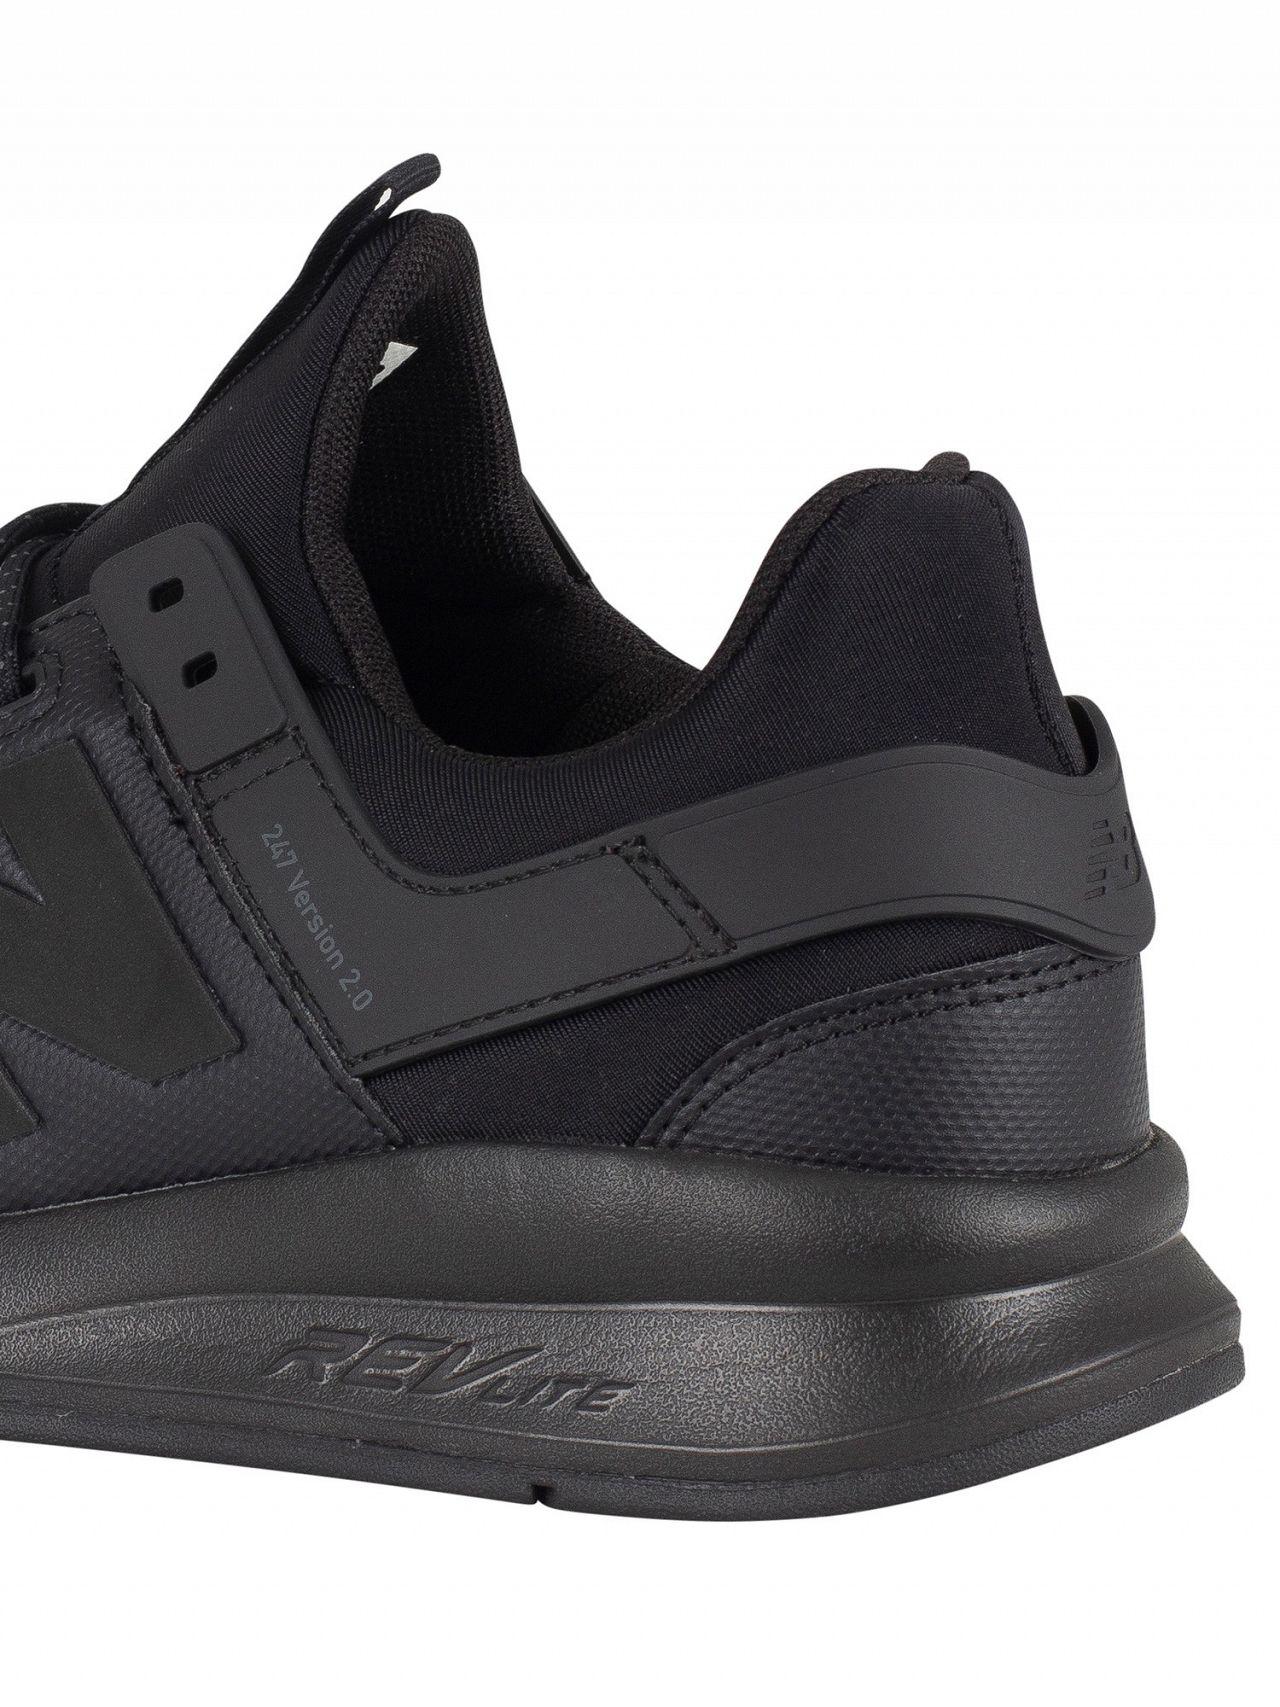 New Balance Black 247 Version 2.0 Trainers for Men | Lyst